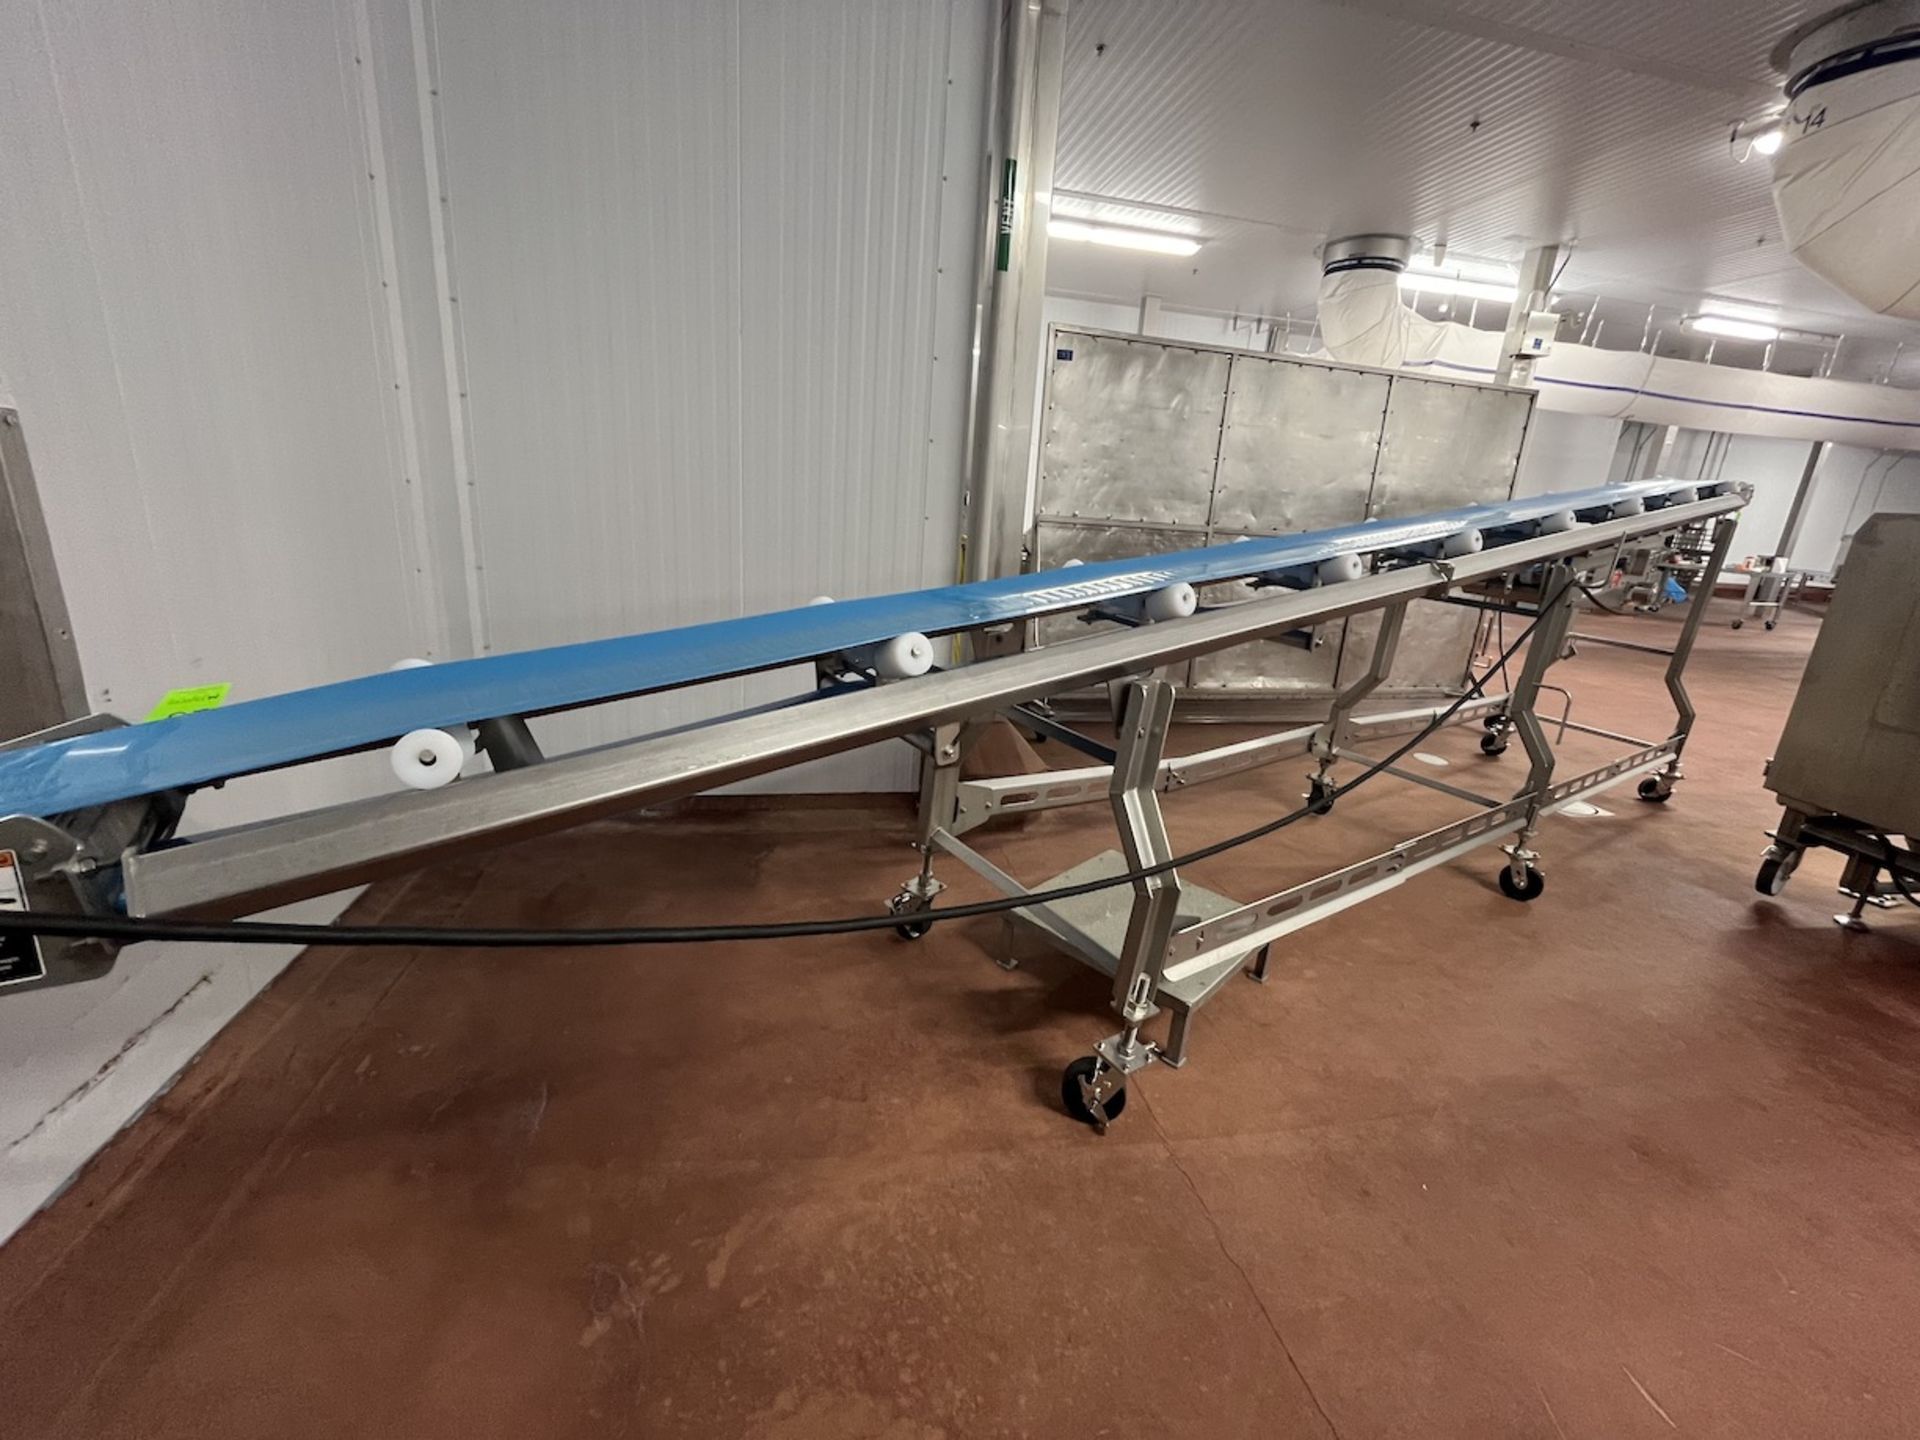 SMALLEY PORTABLE INCLINE CONVEYOR WITH TROUGHING IDLERS, APPROX. 300 IN. L X 12 IN. W BELT - Image 5 of 9